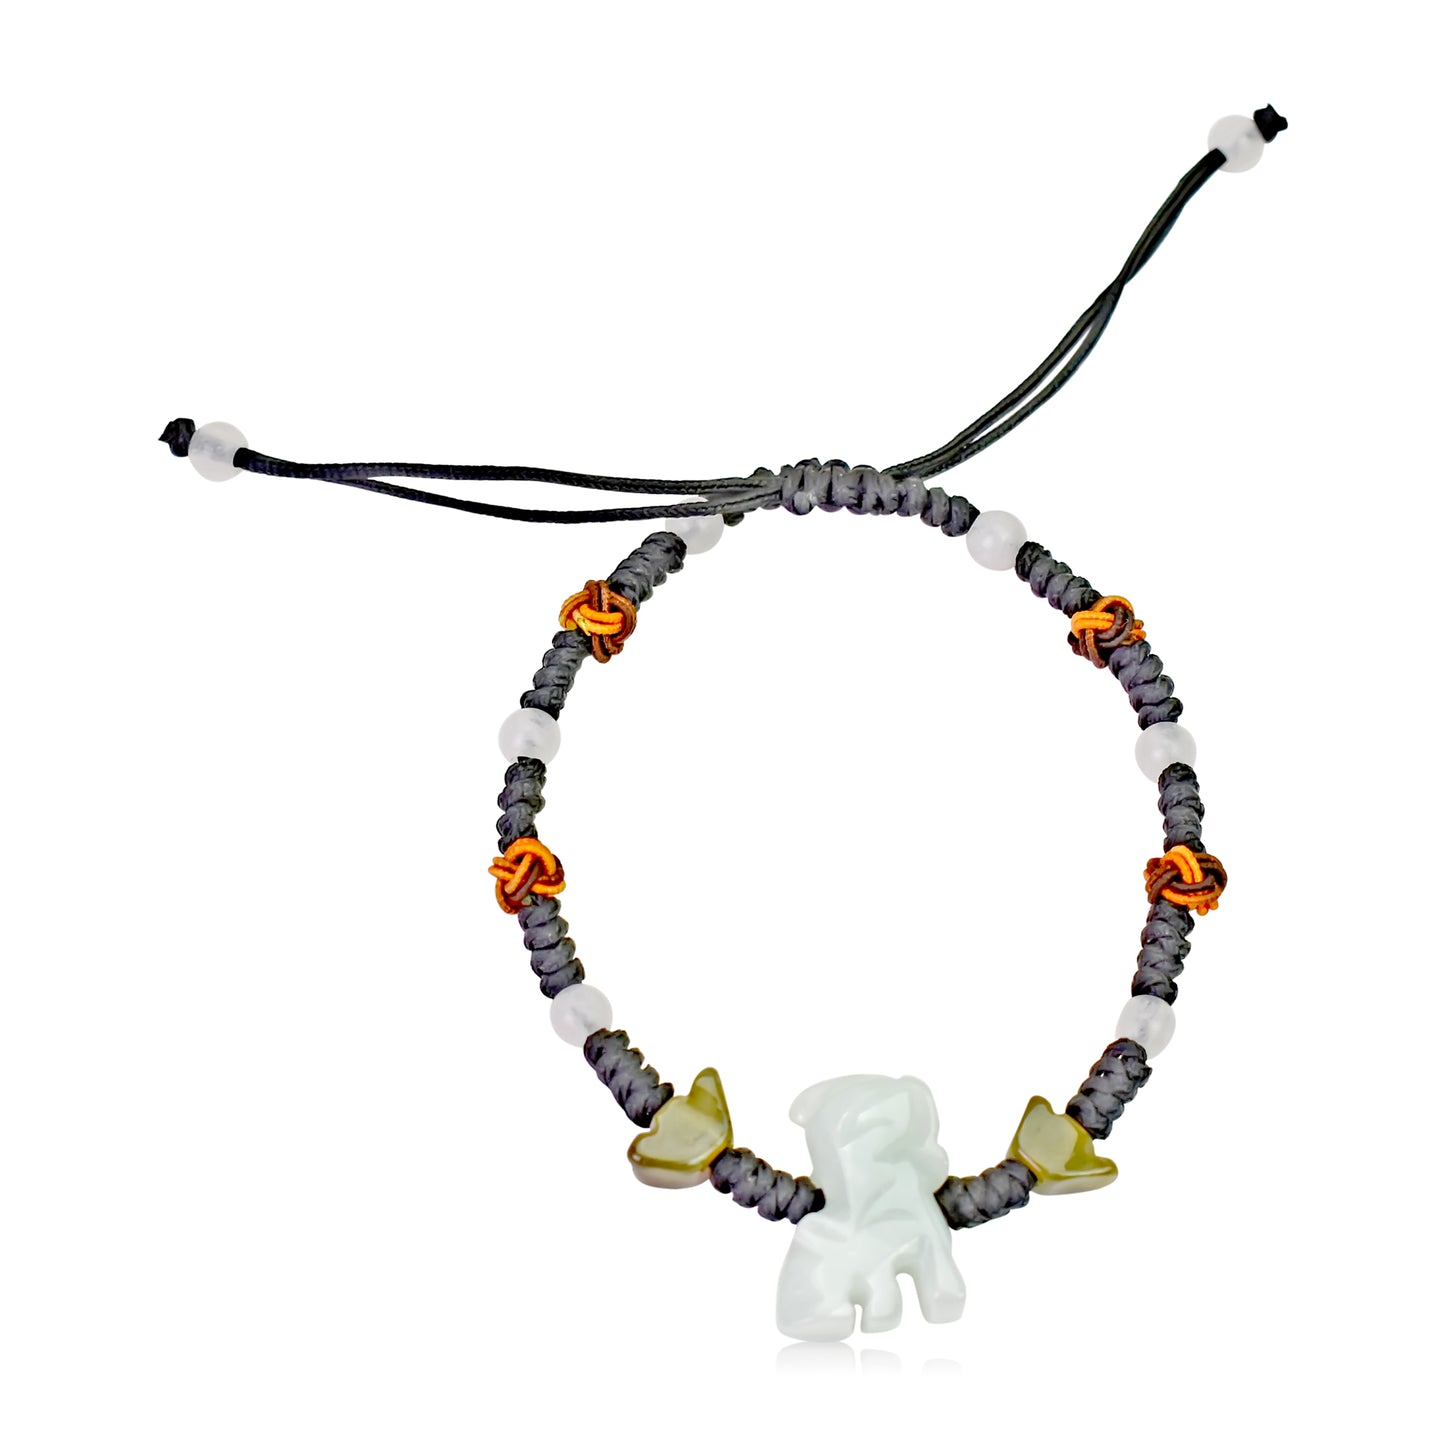 Step Into Your Inner Power with a Tiger Beaded Jade Bracelet made with Black Cord